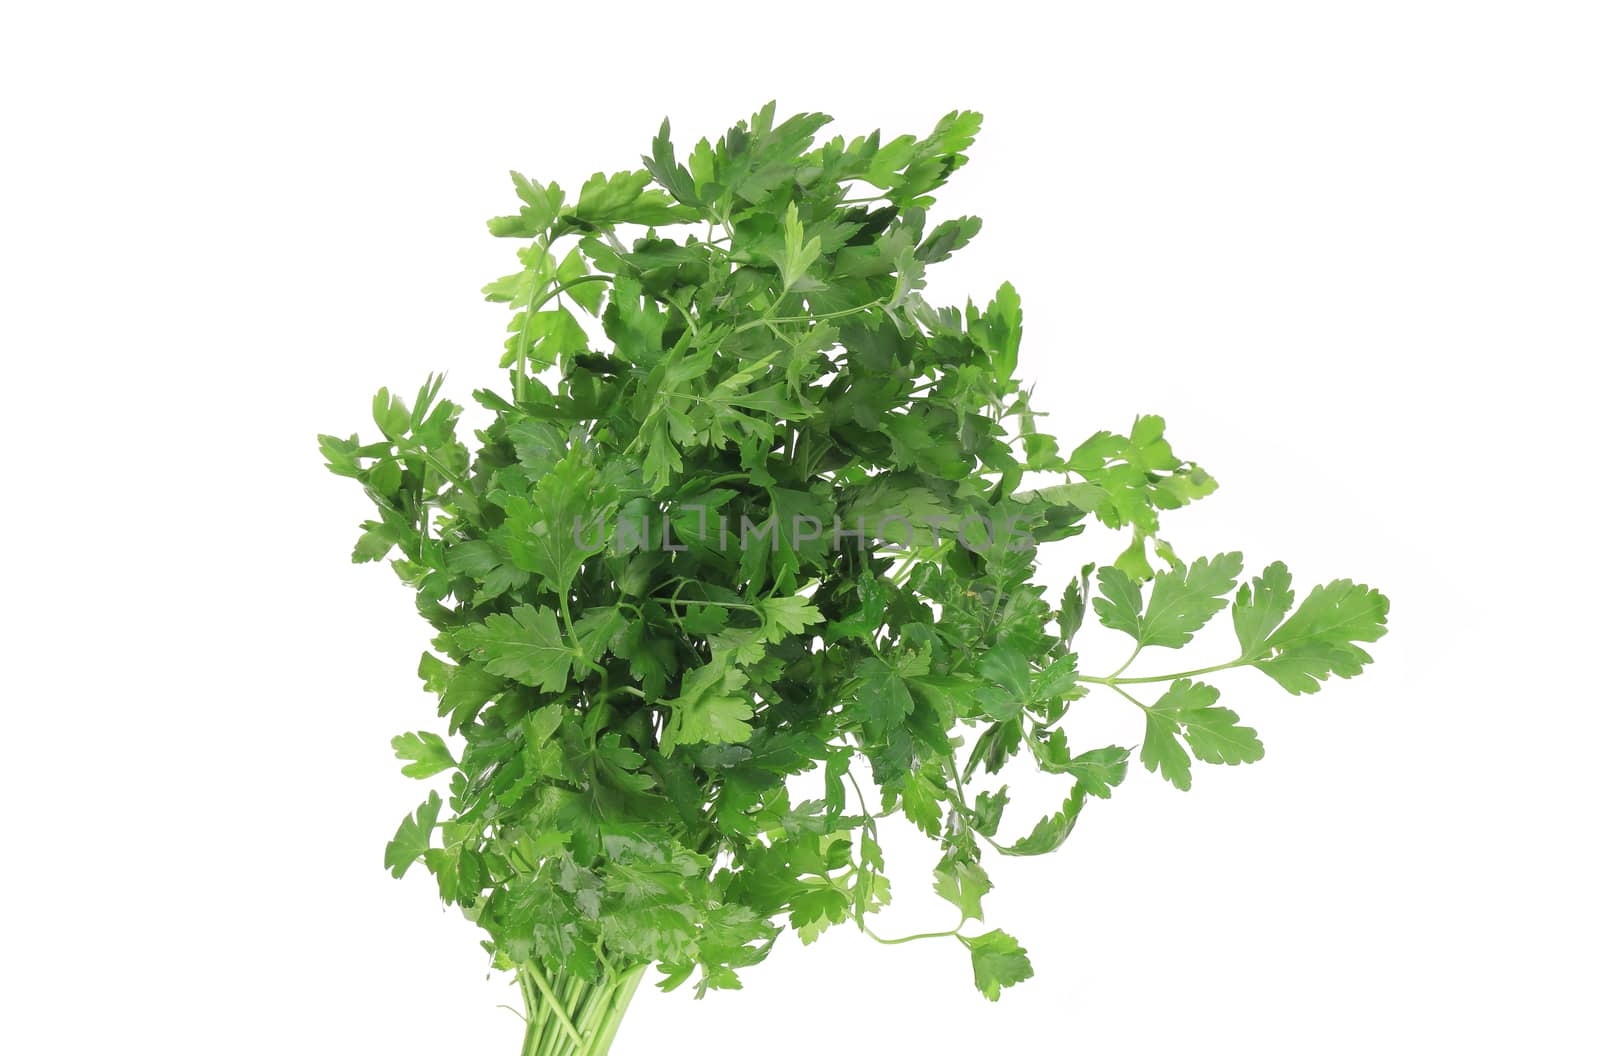 Bunch of fresh green parsley. Isolated on a white background.